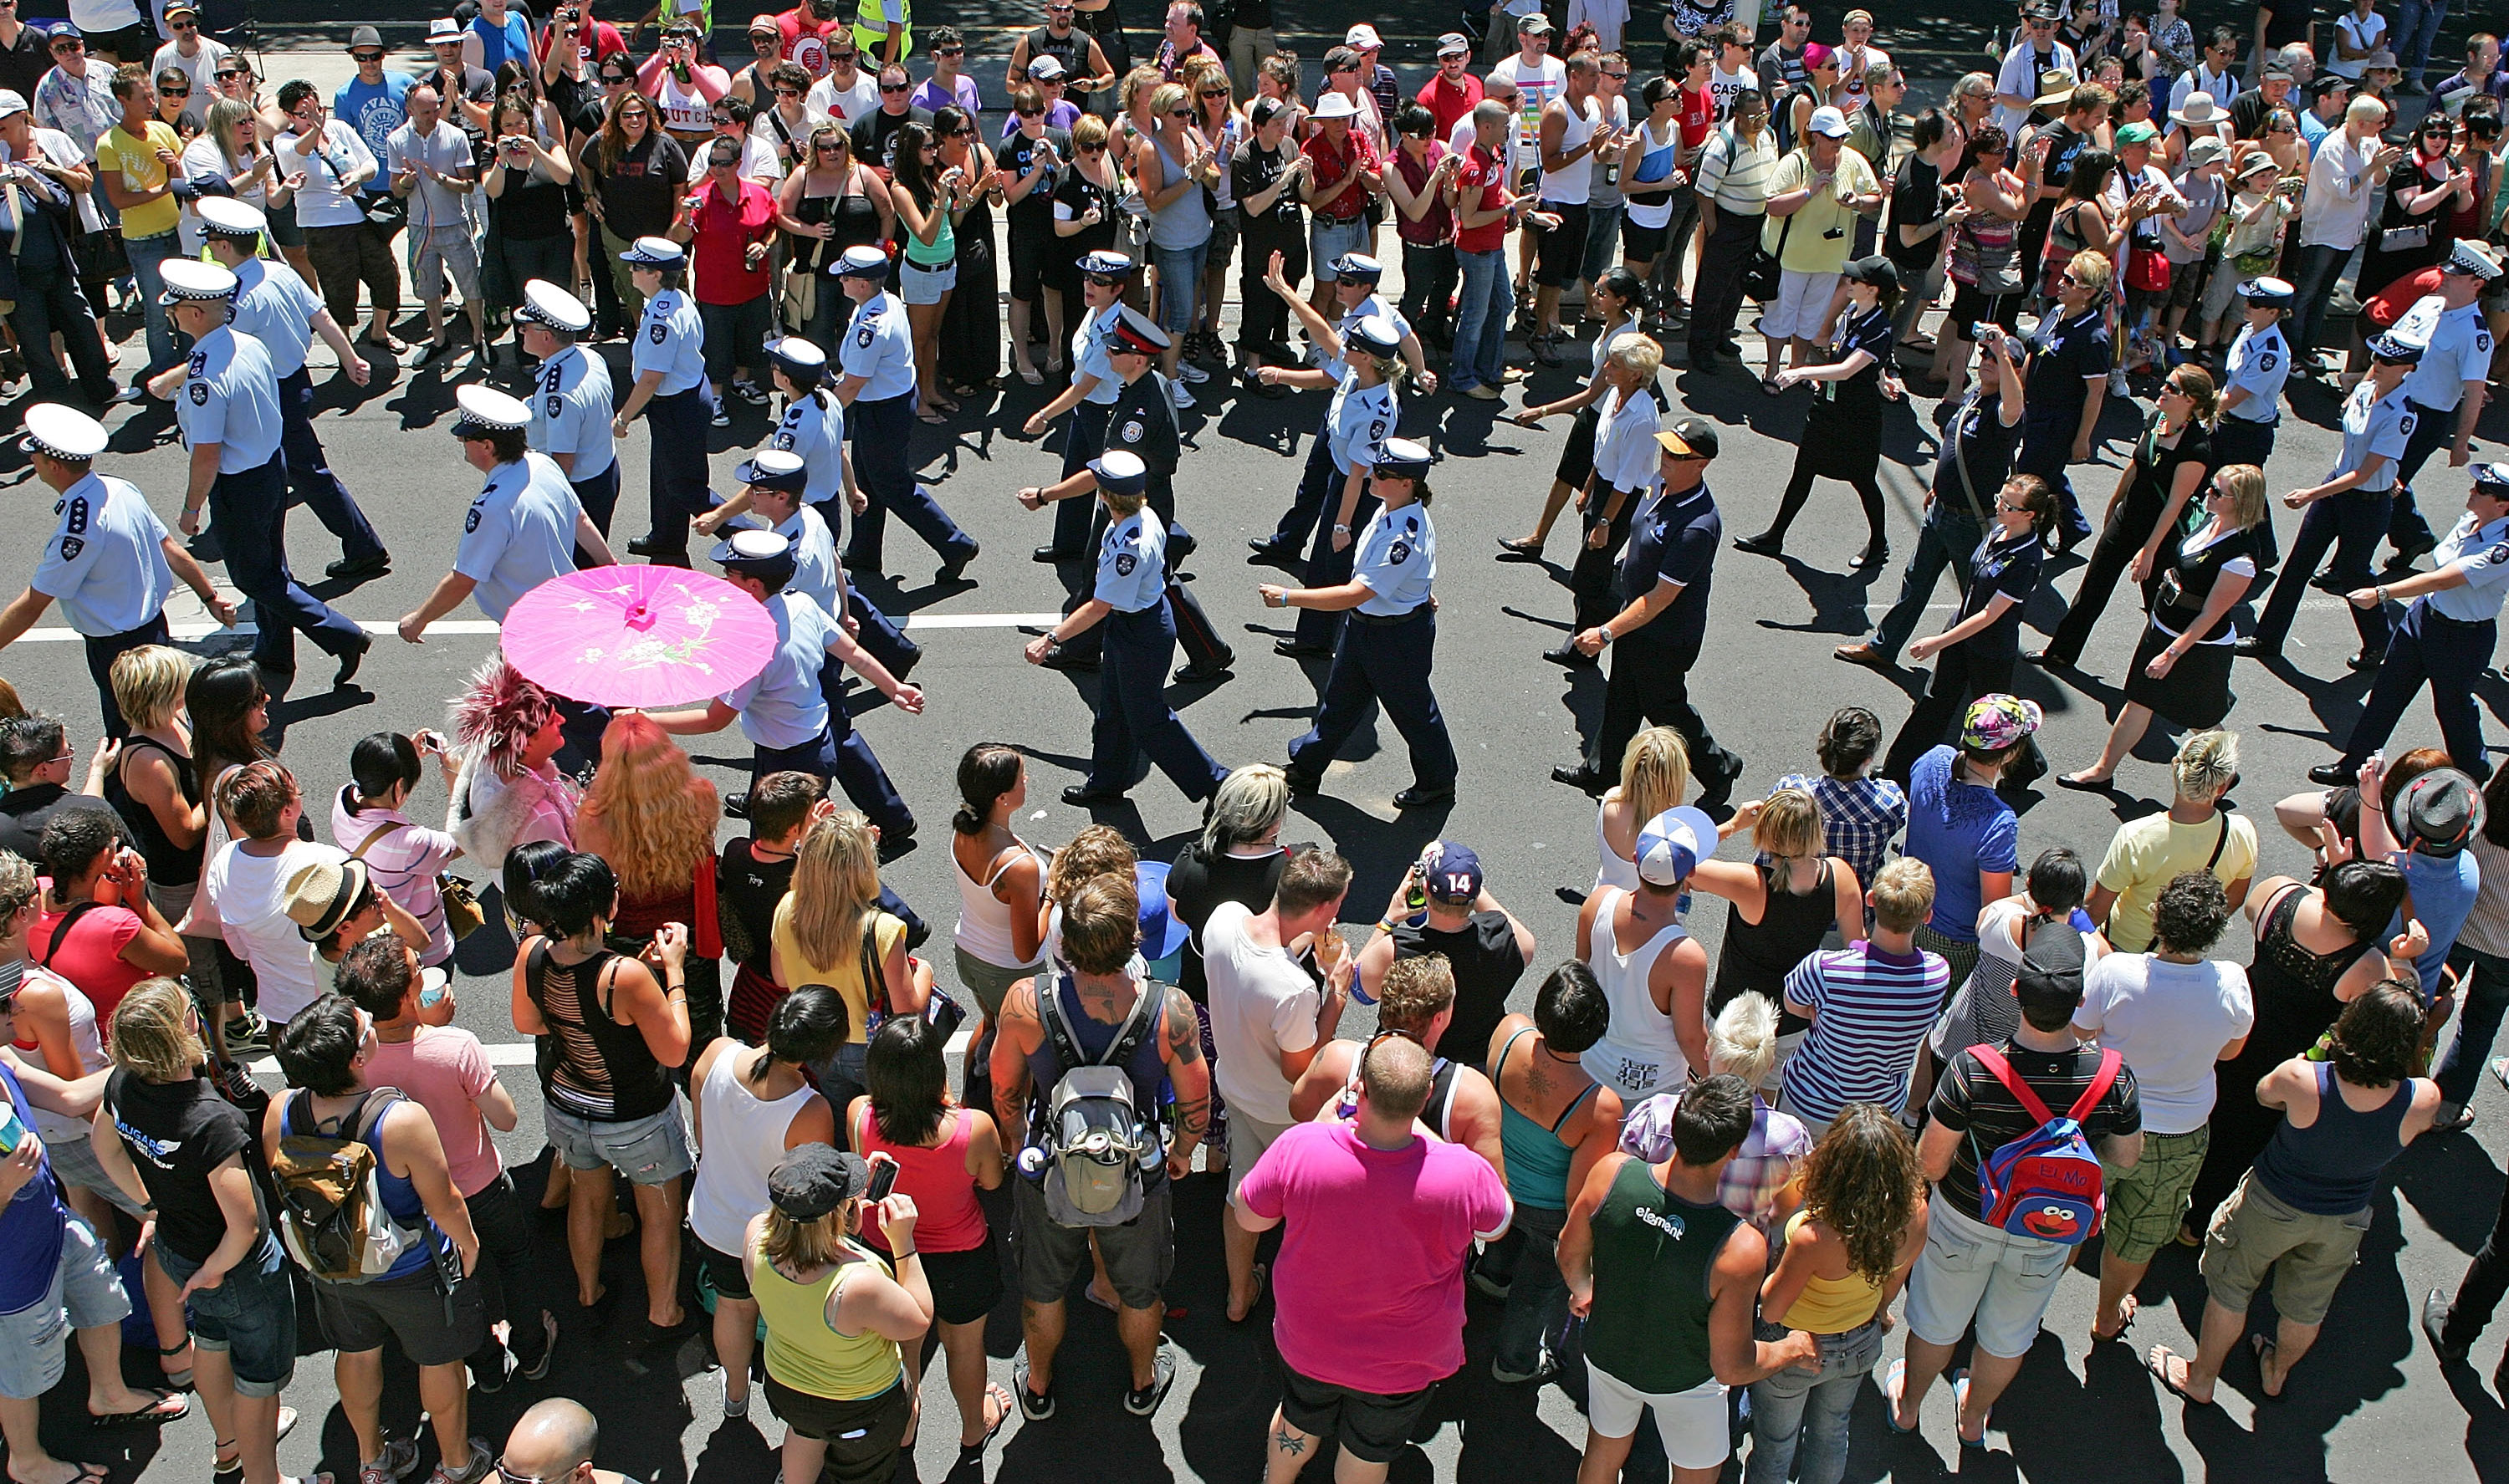 Vic Police Confirmed It’ll Be At Melbourne Pride Despite Heavy Opposition From LGBTQIA+ Orgs